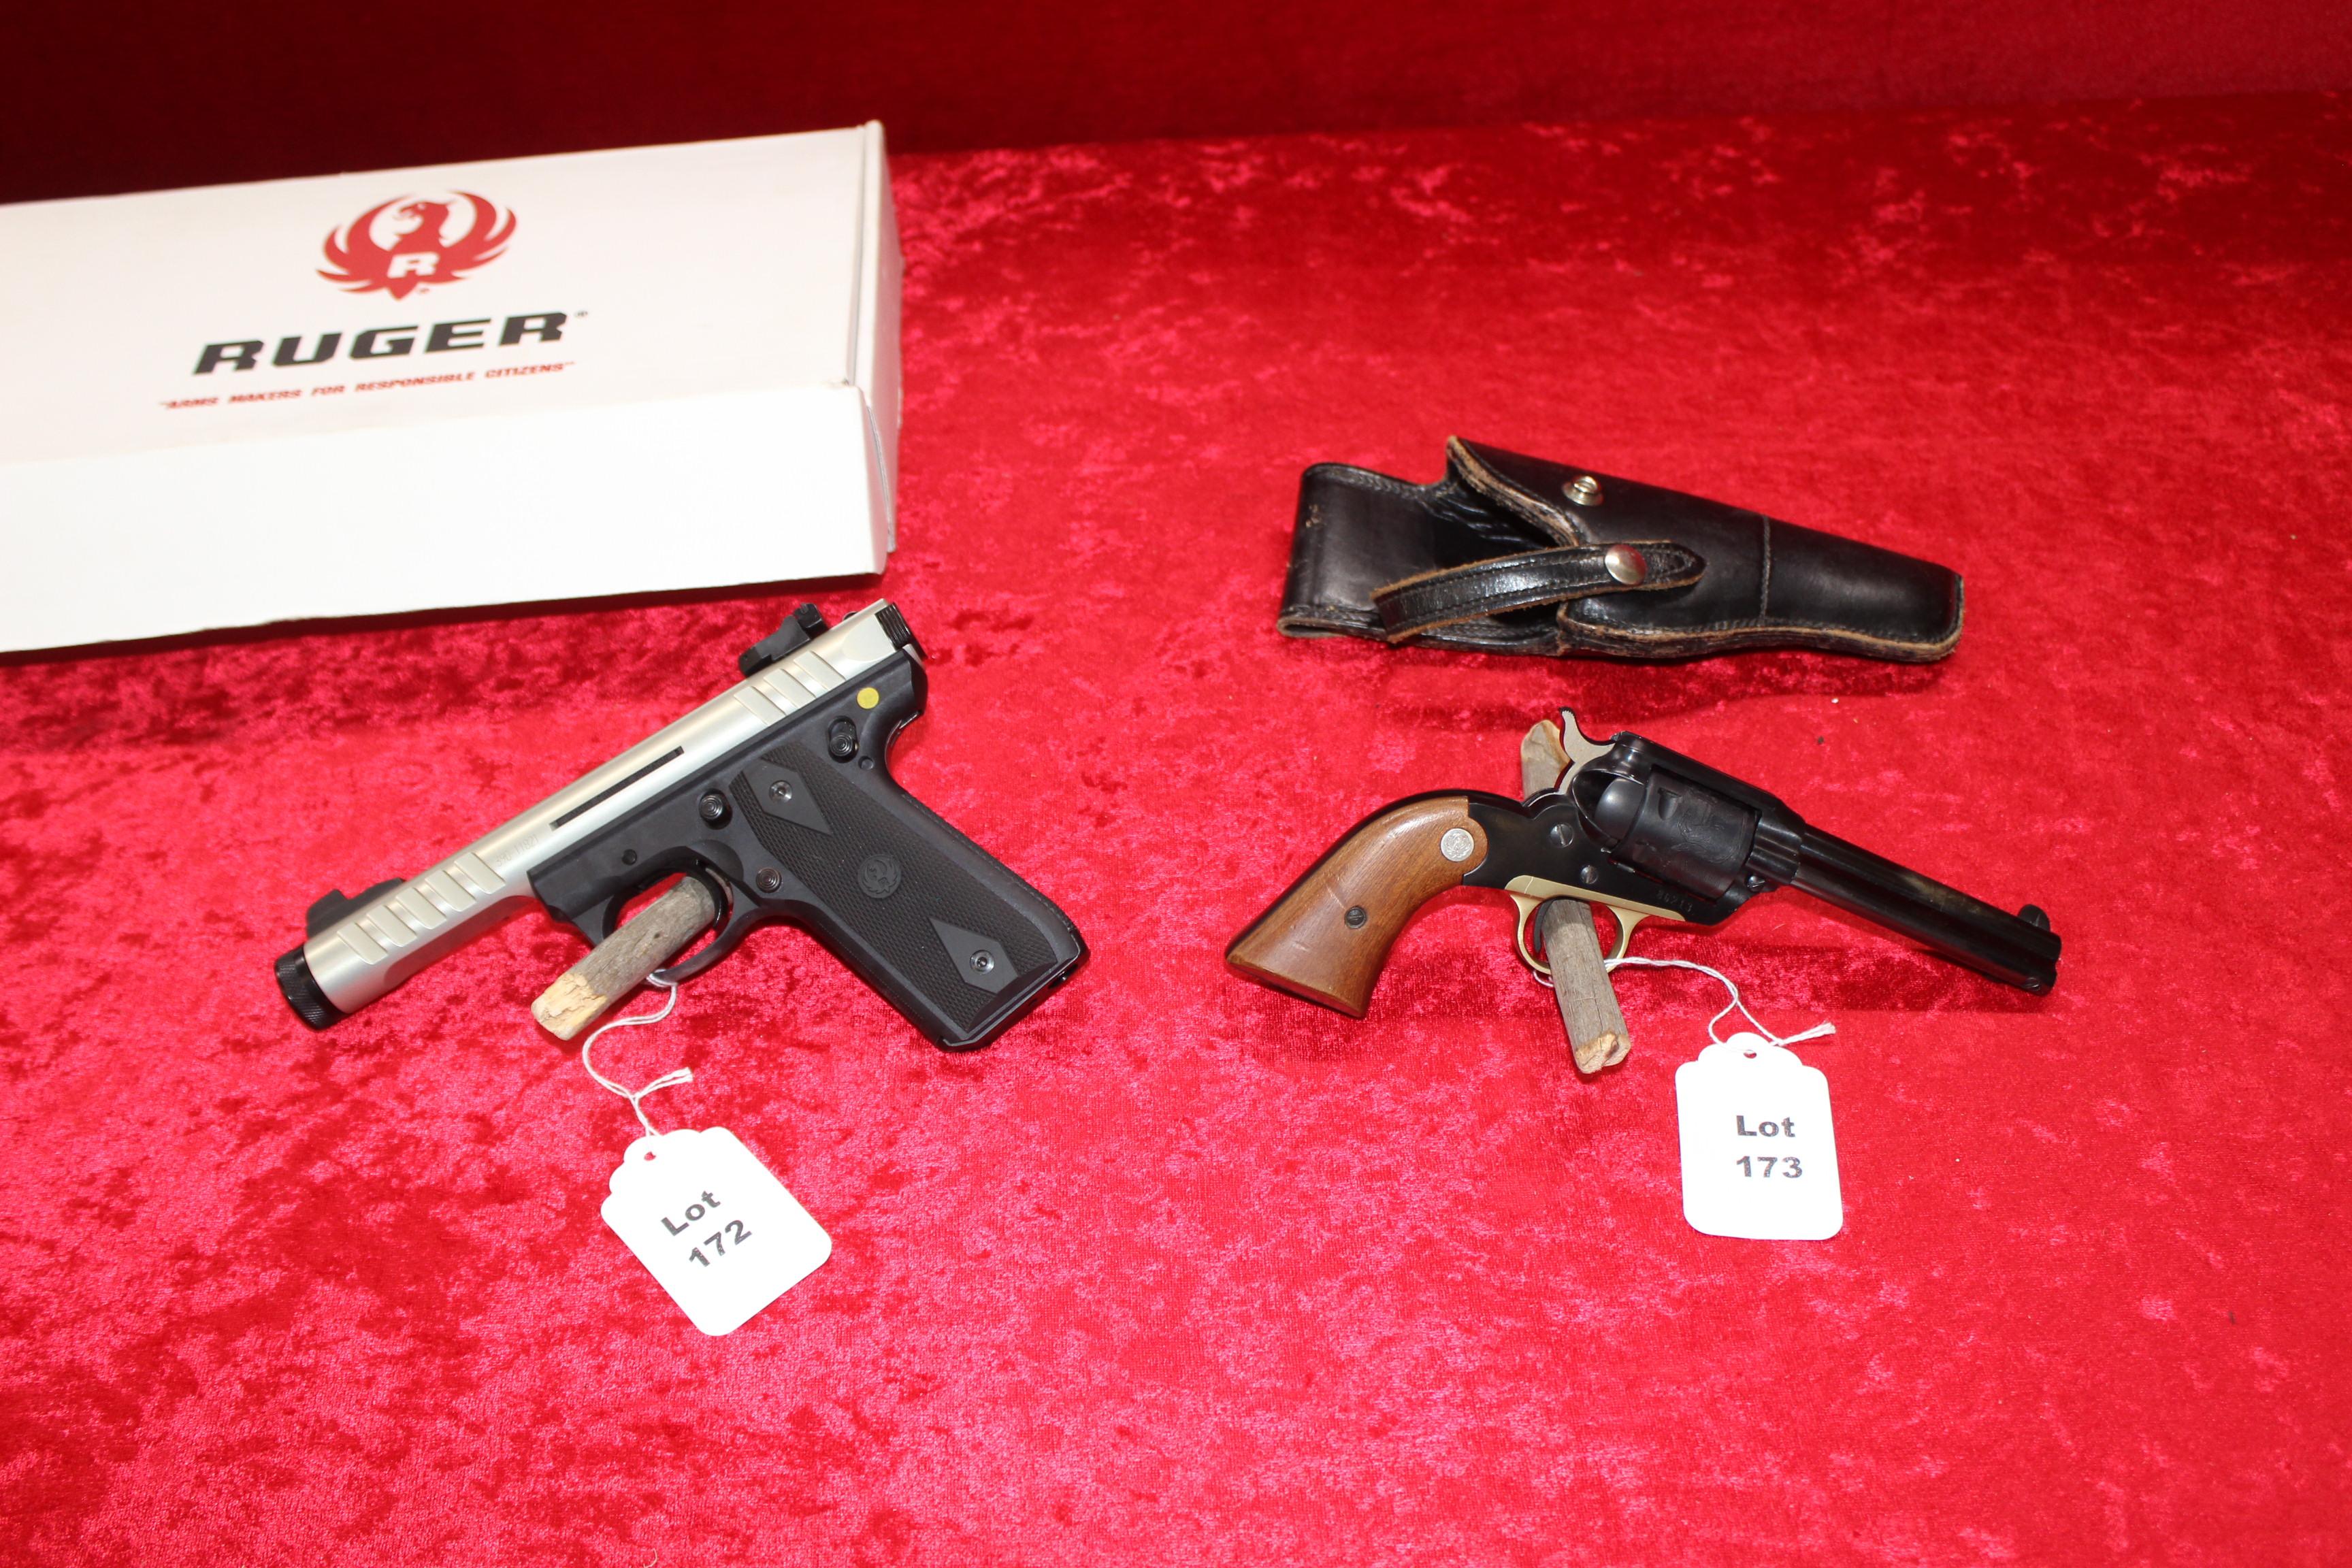 Ruger 22/45 automatic pistol